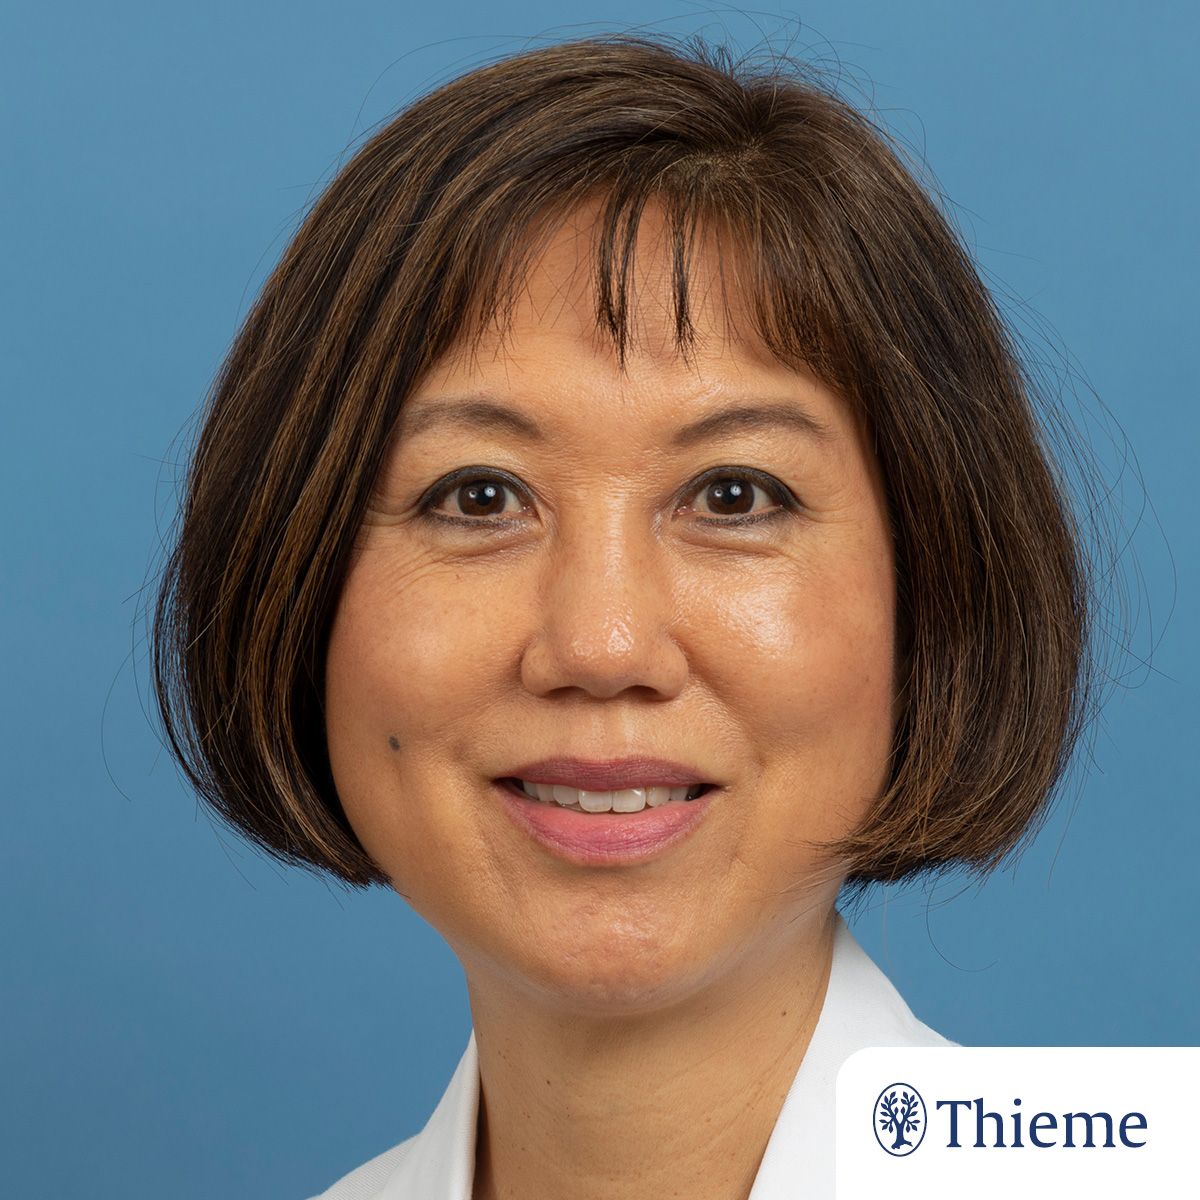 #ThiemeSpotlight for #AAPIHeritageMonth: Meet Dr. Marilene B. Wang, a head and neck surgeon who is a Professor at @dgsomucla and the Editor-in-Chief of the Journal of Neurological Surgery Reports at #Thieme. 🎧🎙️ Read the full interview with Dr. Wang ➡️ brnw.ch/21wJMno